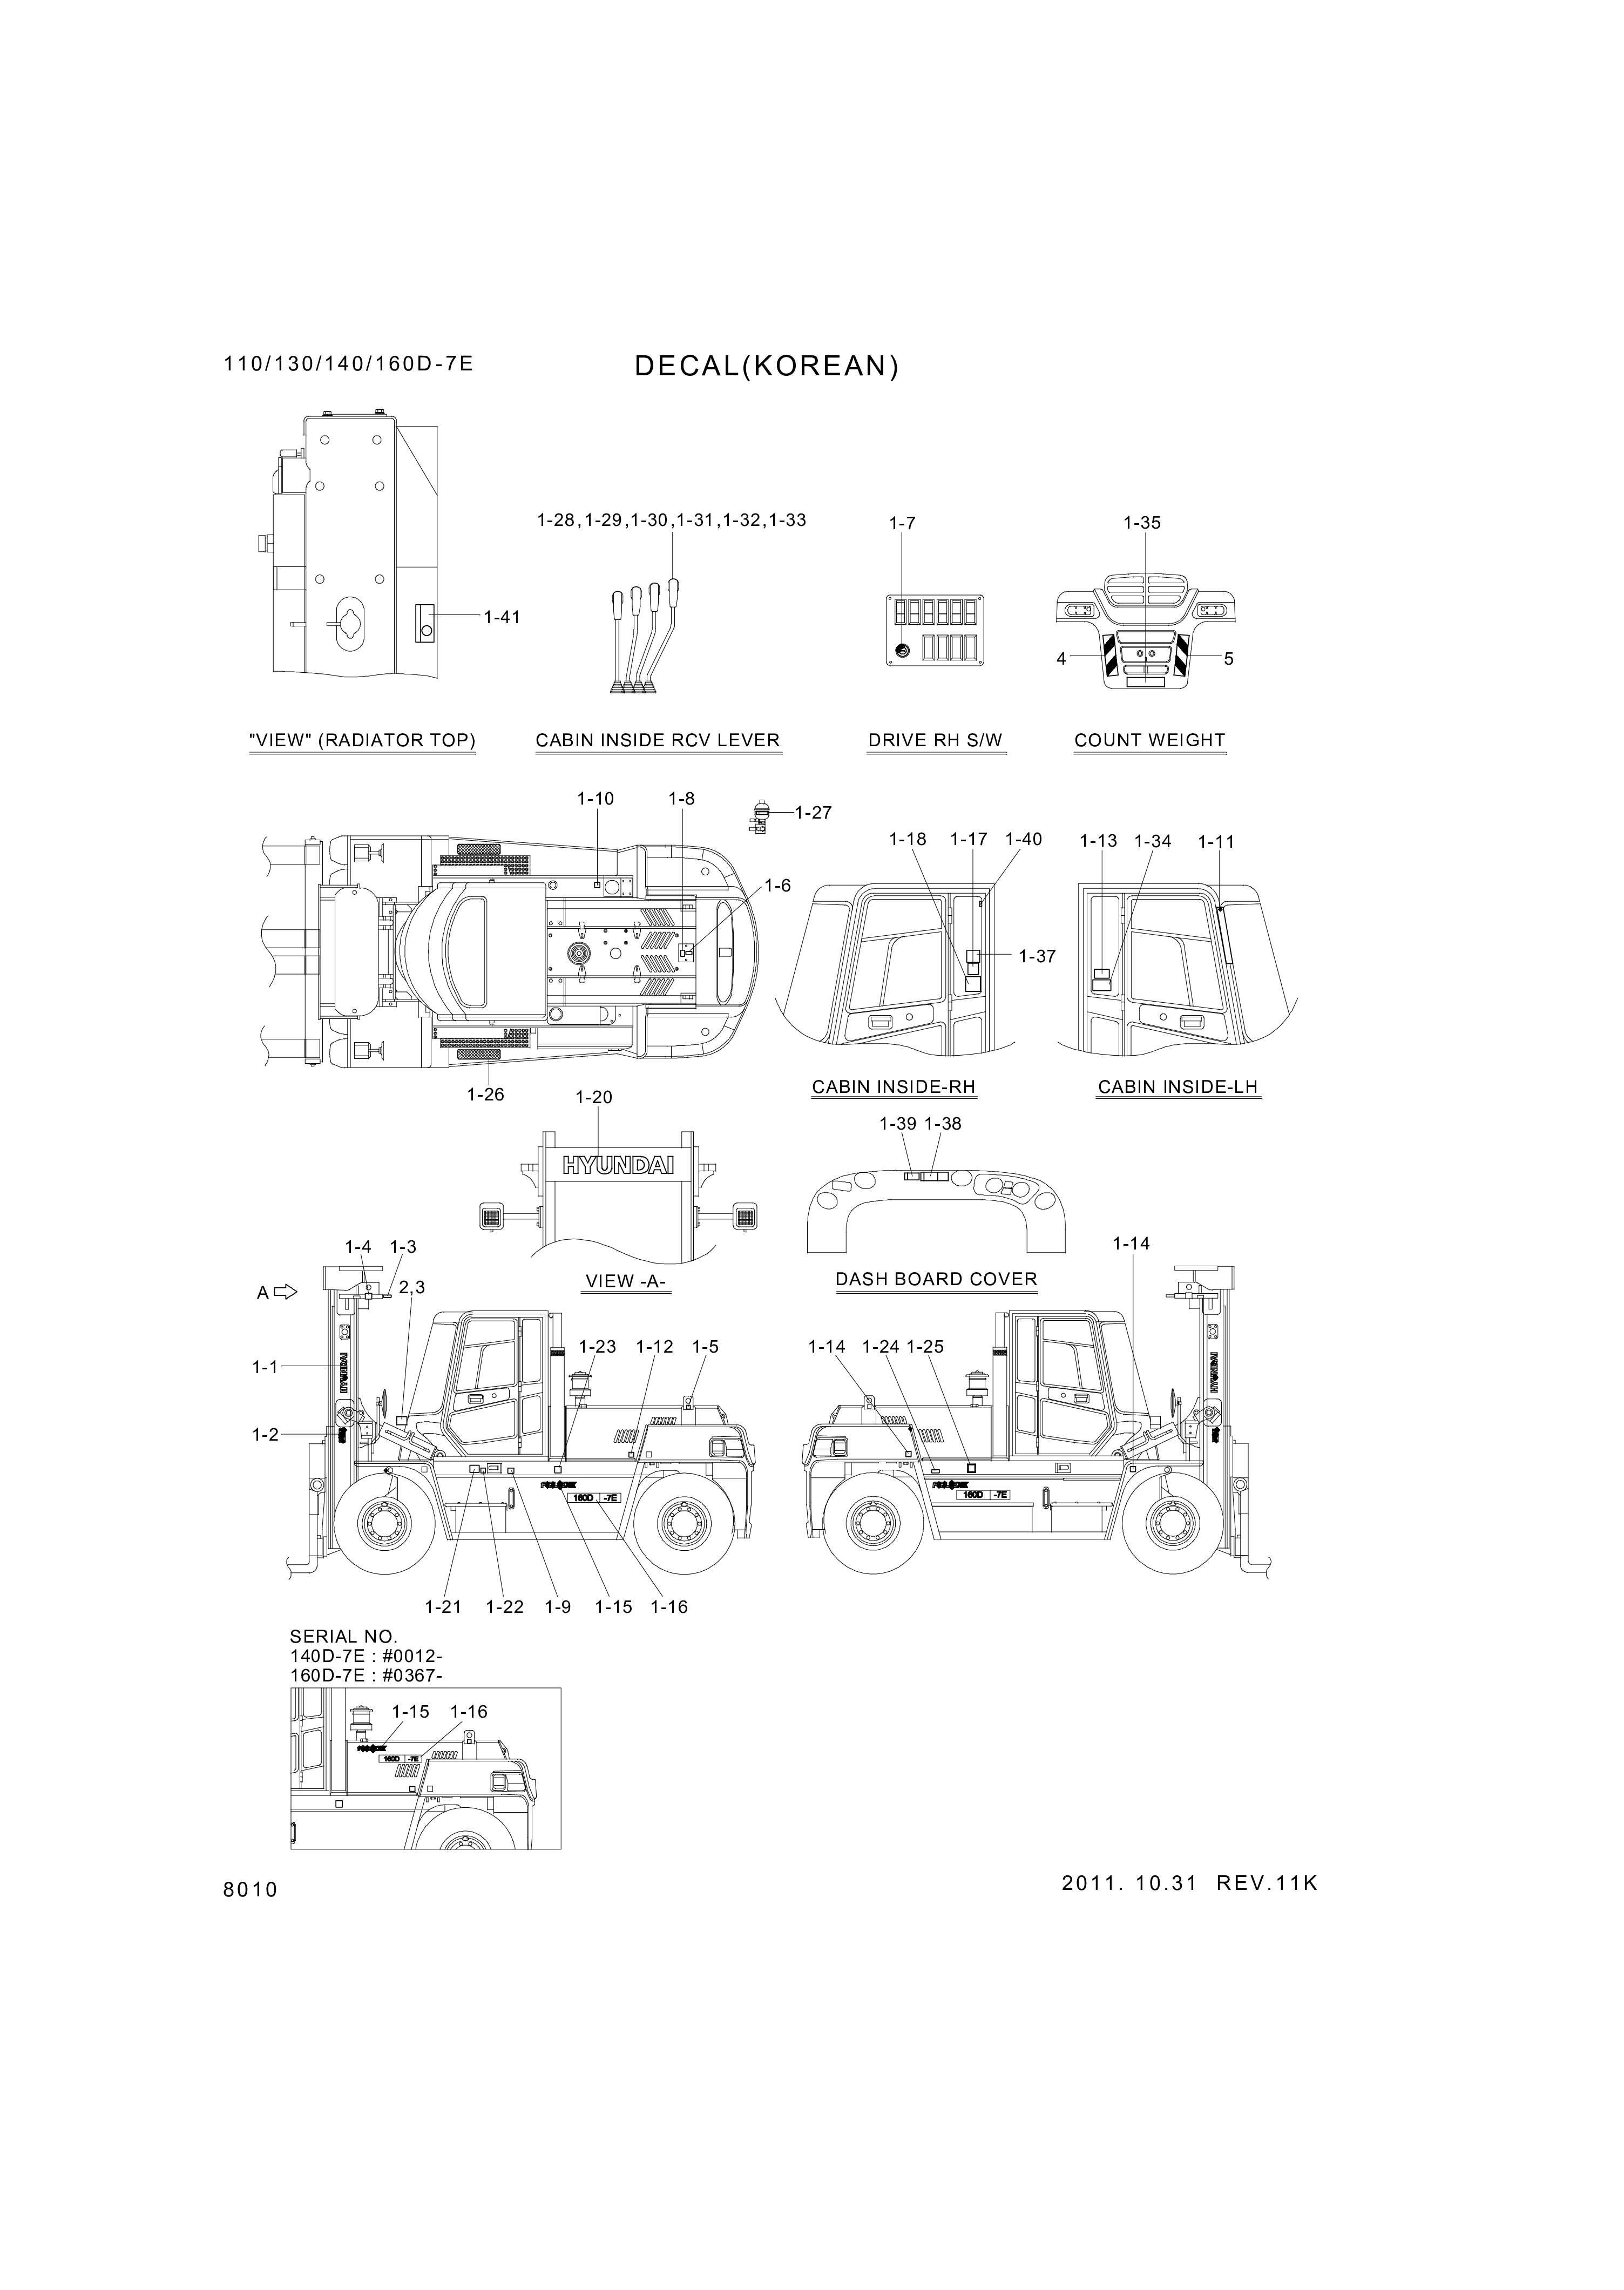 drawing for Hyundai Construction Equipment 93FT-03000 - DECAL-EQUIP SPEC (figure 1)